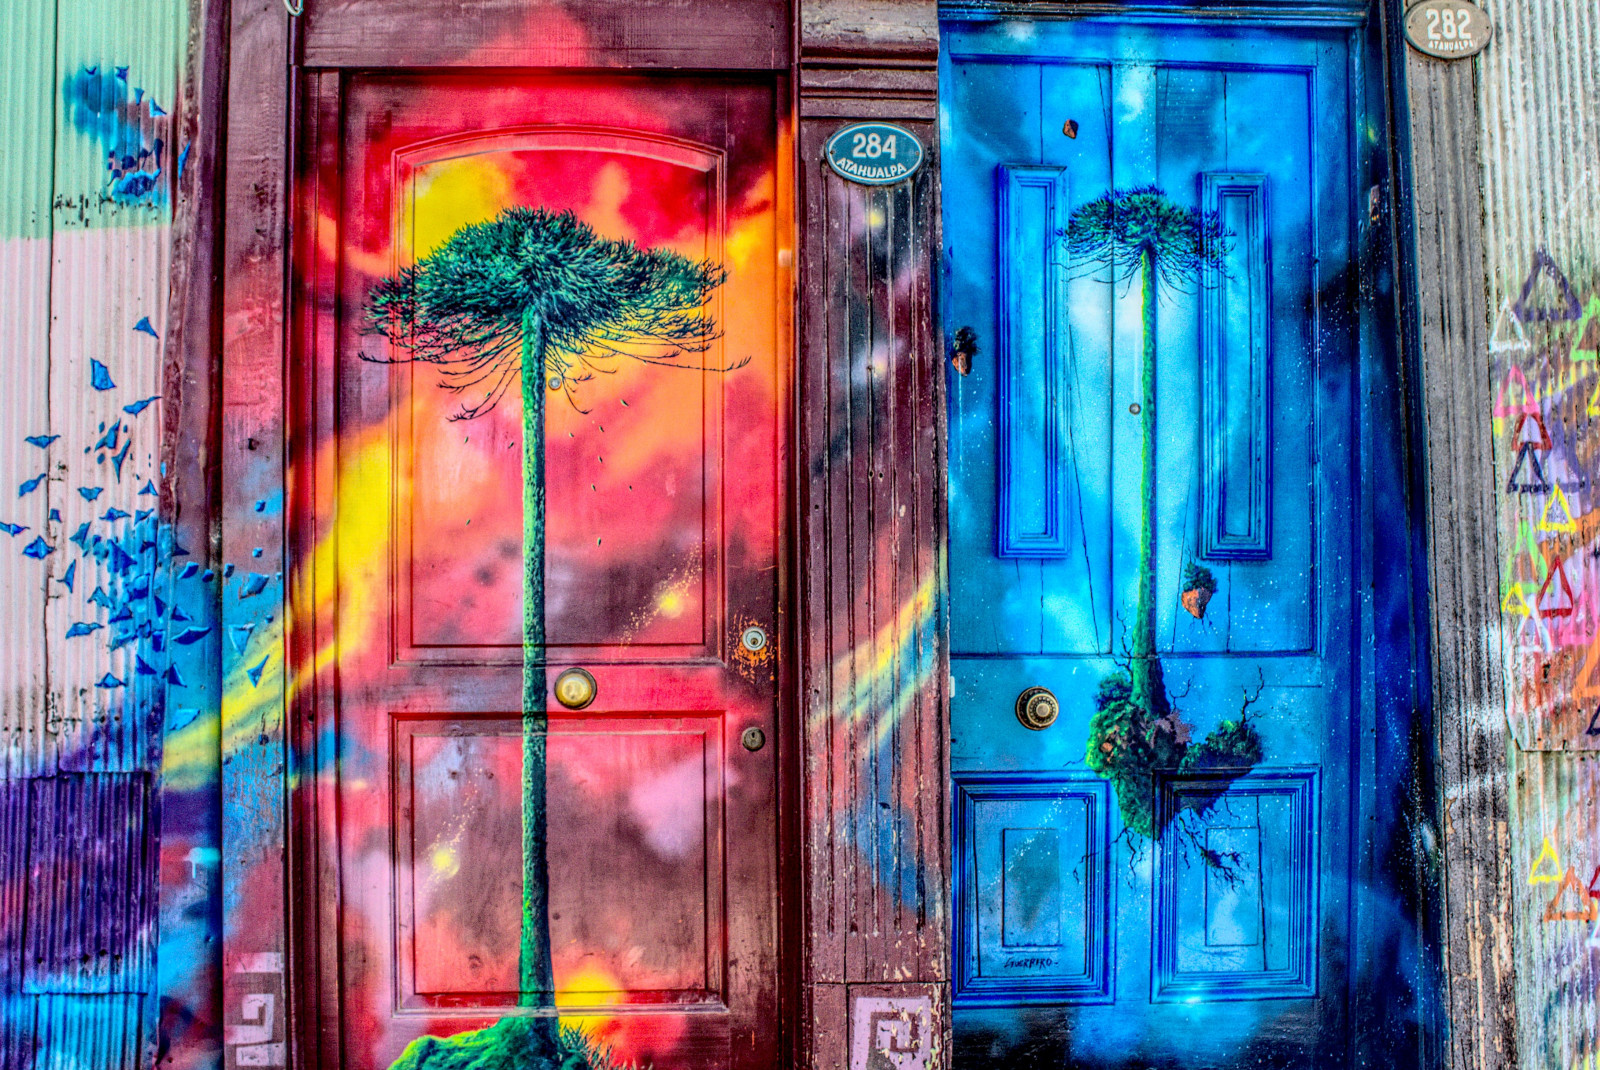 Two wooden doors painted pink and blue